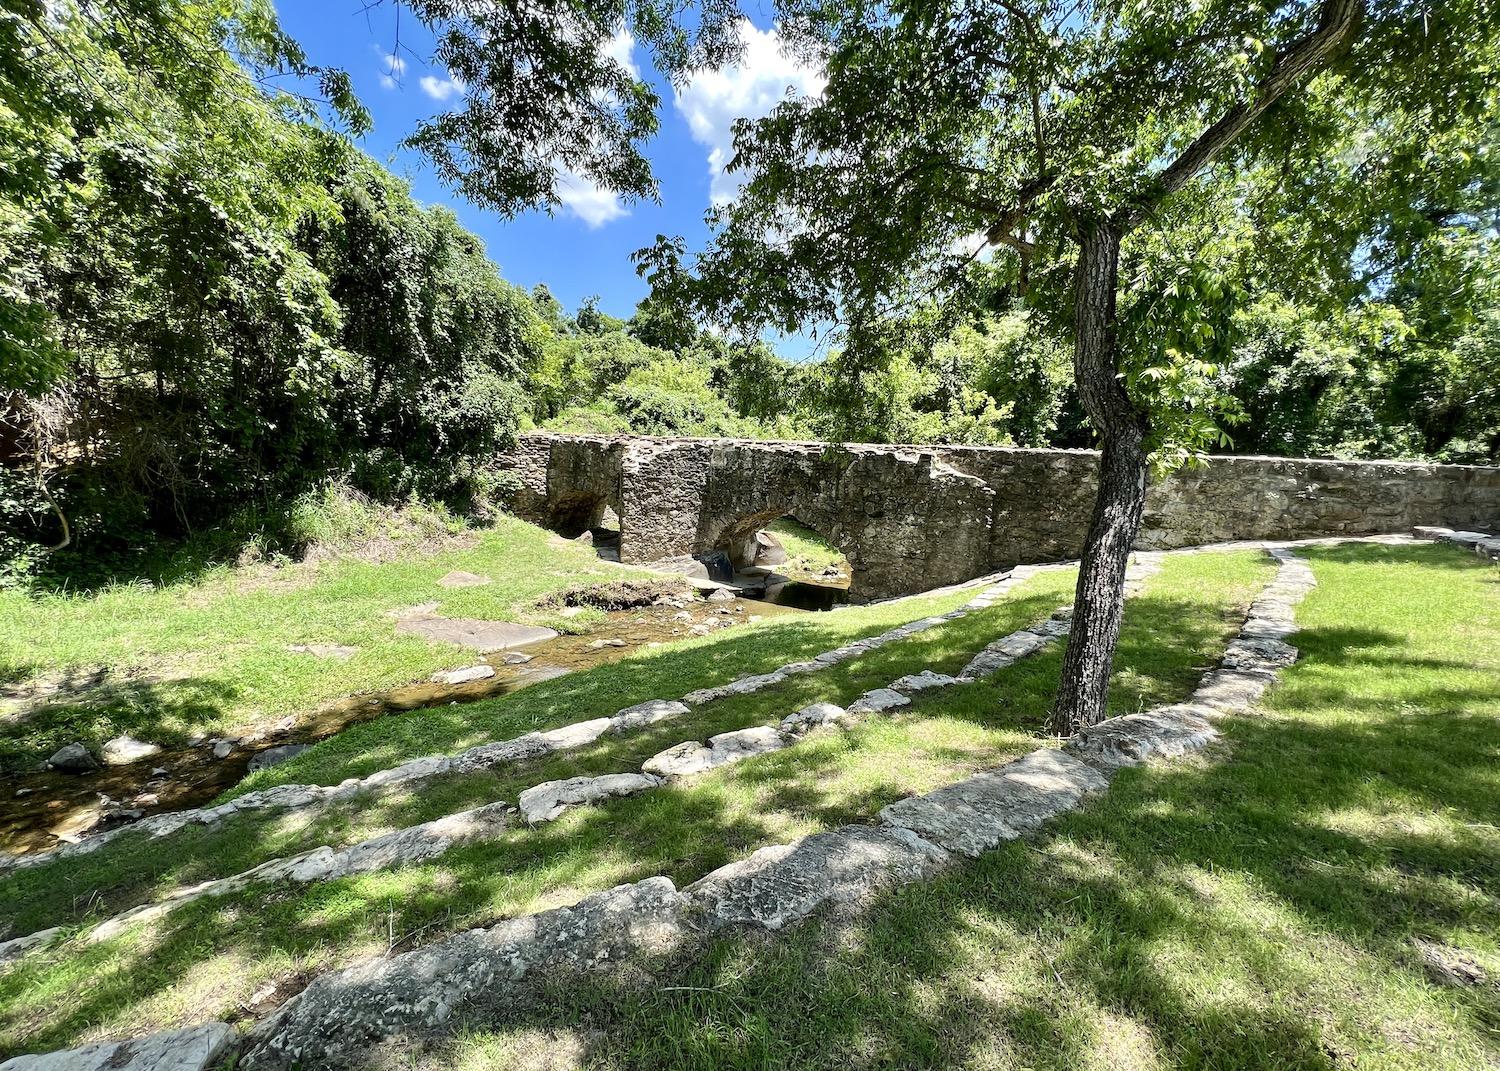 The Espada Aqueduct is a National Historic Landmark that goes over a creek and was recently drained to clear sediment.